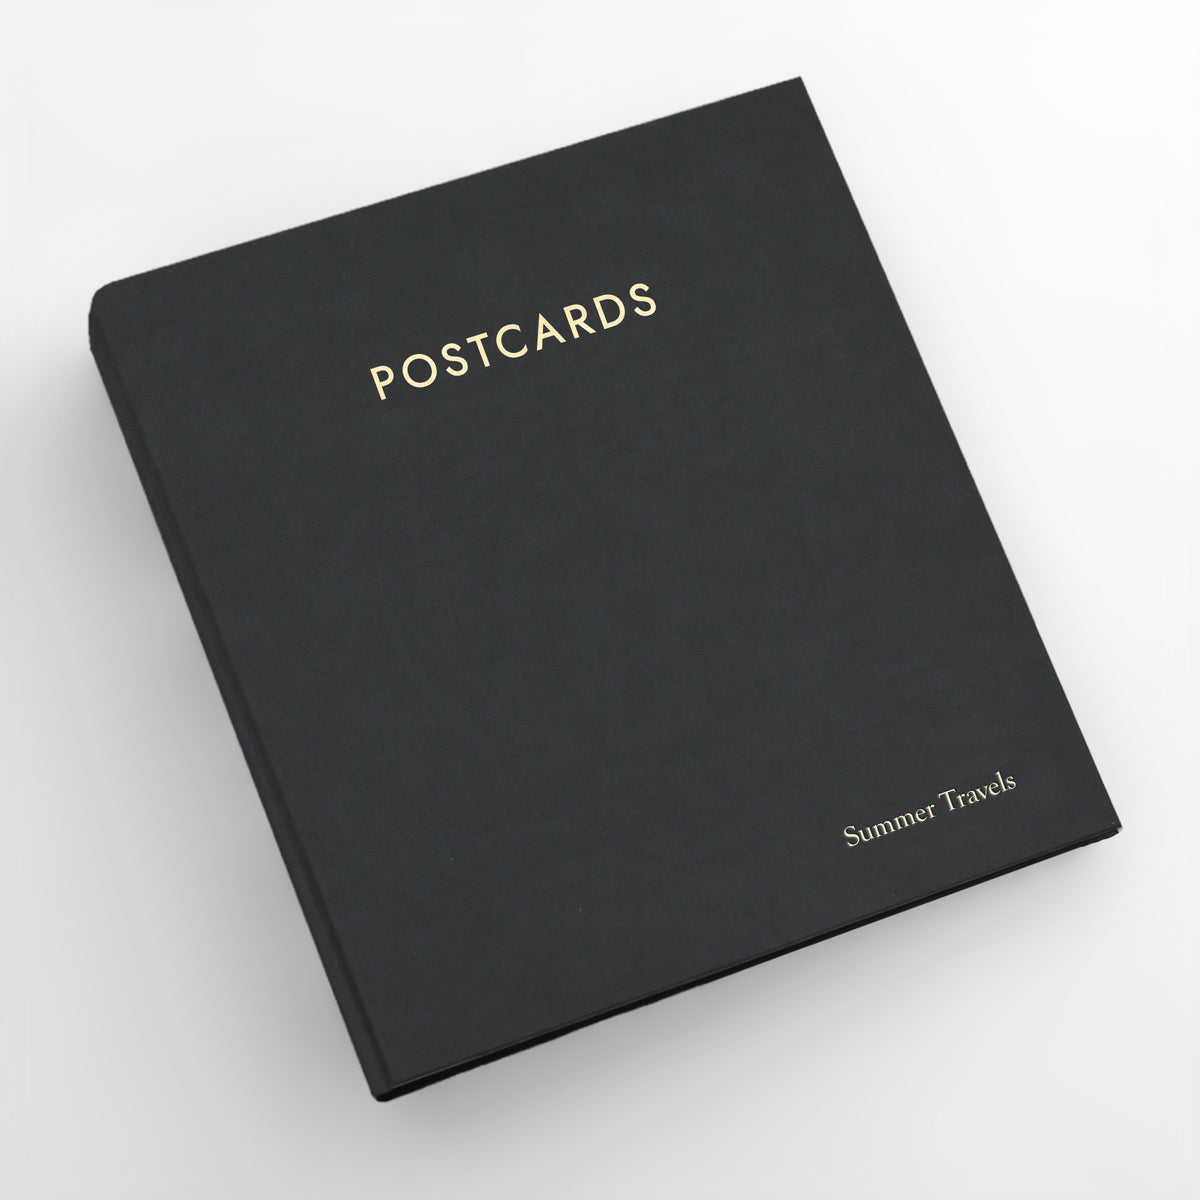 Large Postcard Album | Cover: Black Vegan Leather | Available Personalized